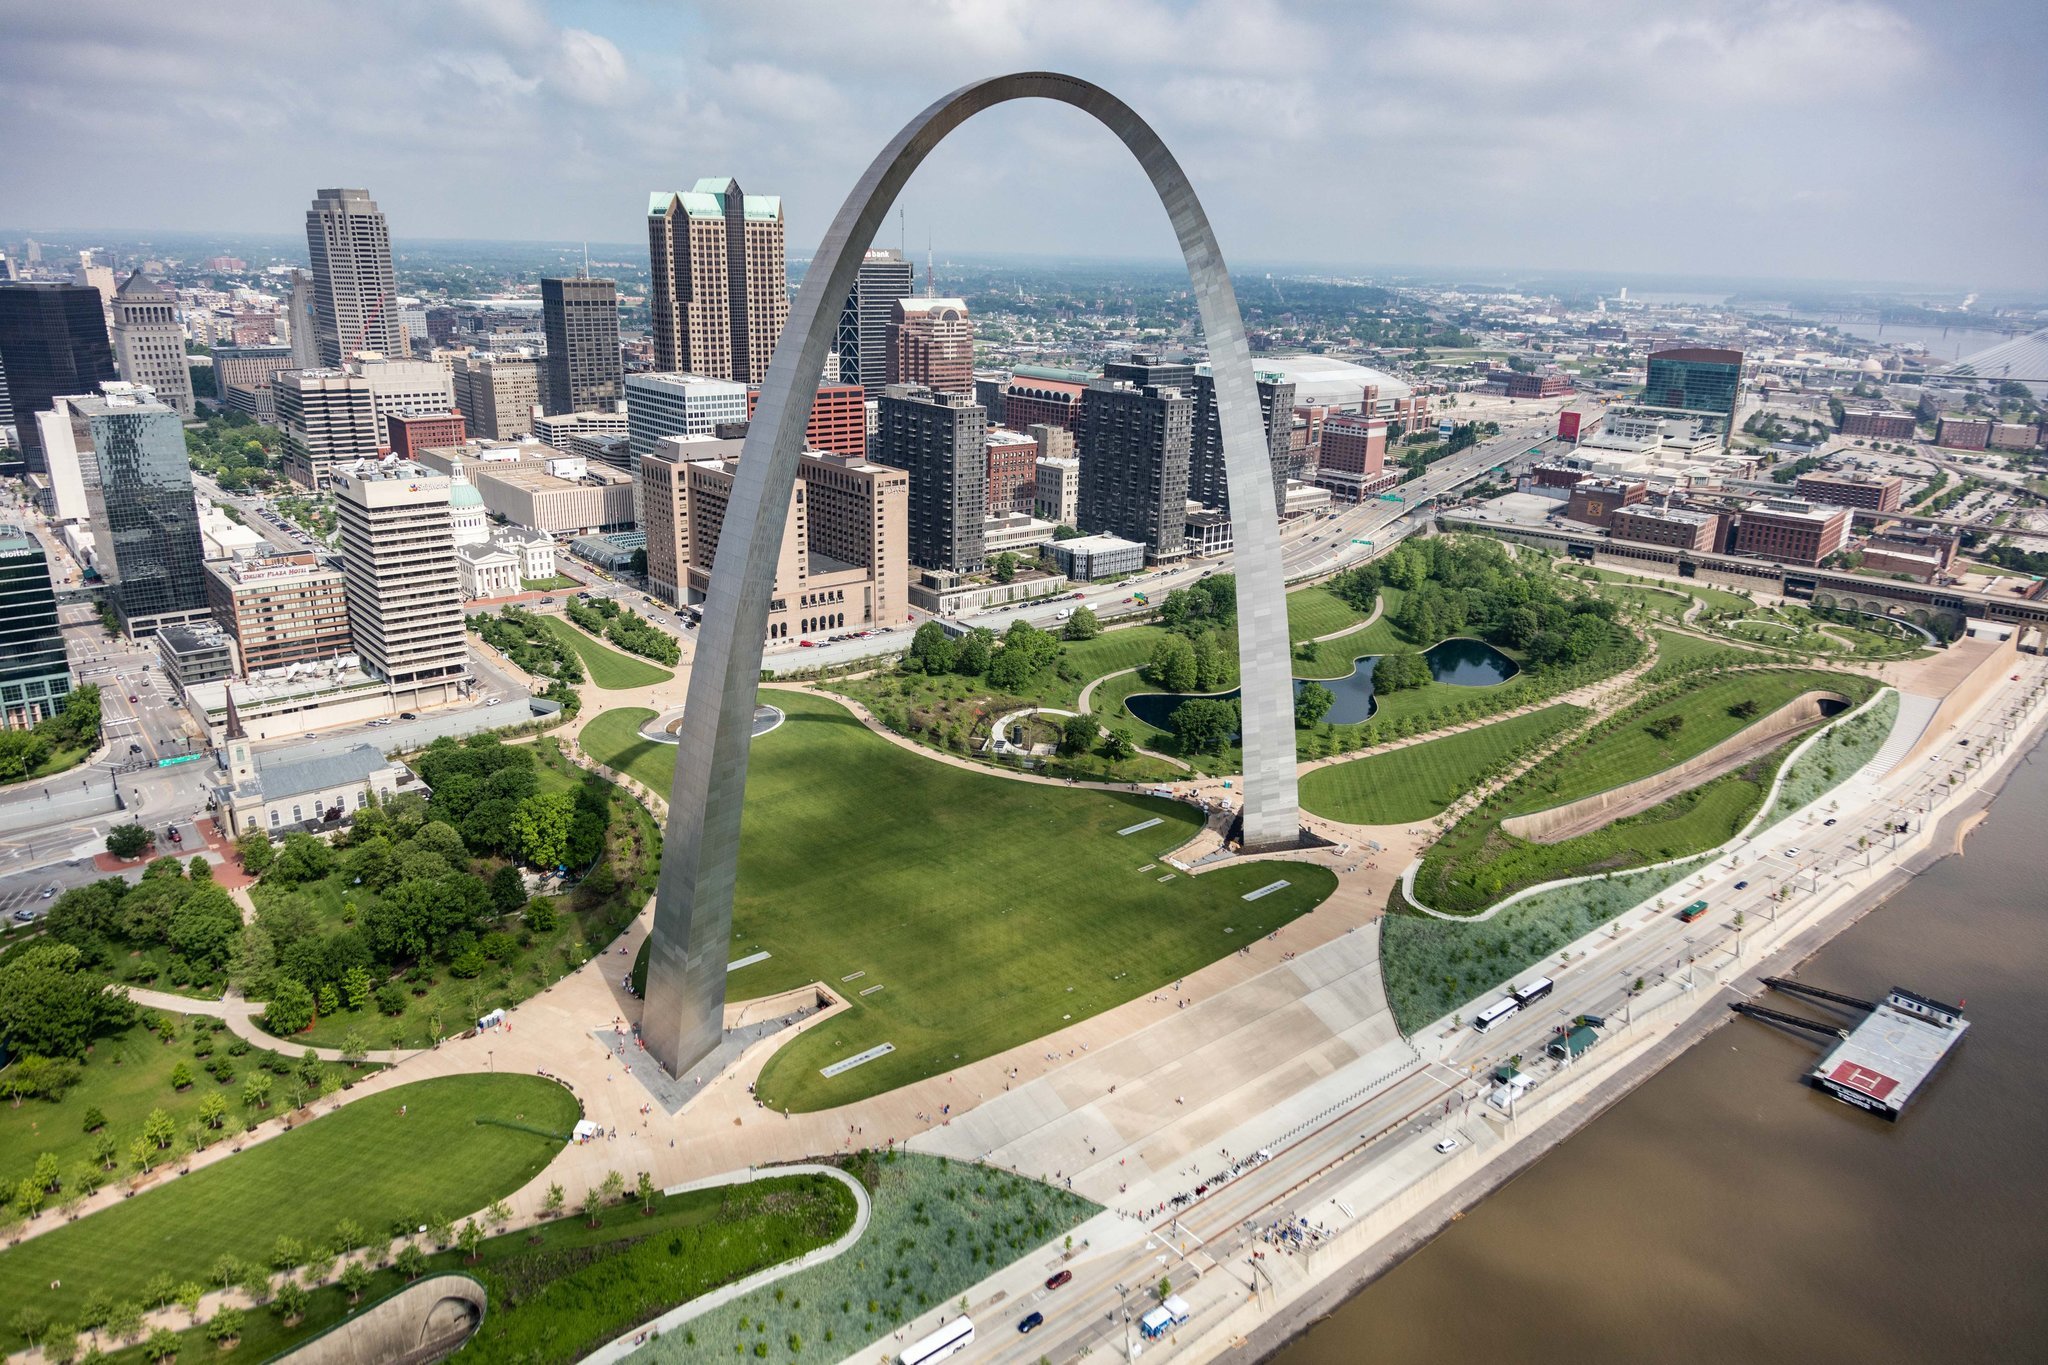 Gateway Arch transformed: New landscape, expanded museum better link the icon to St. Louis ...